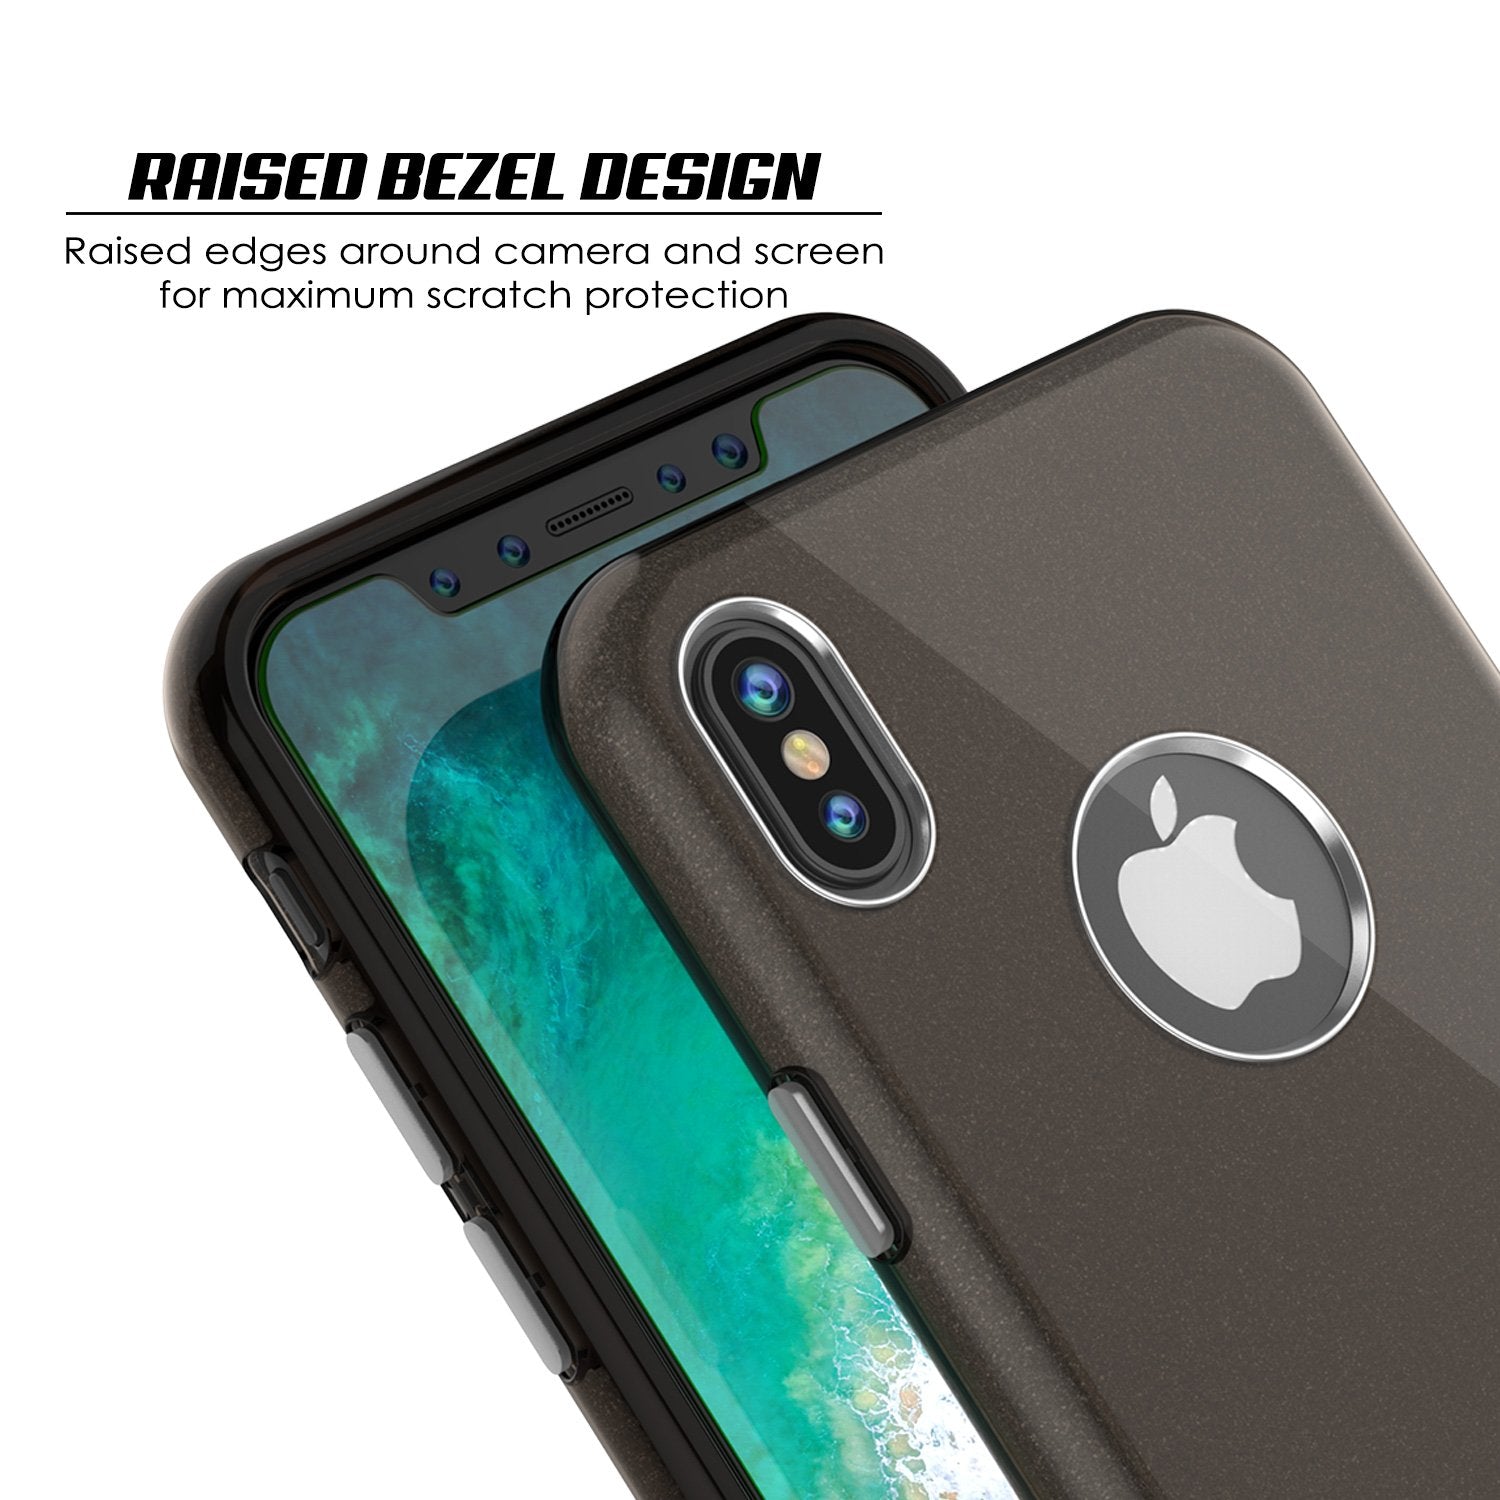 iPhone X Case, Punkcase Galactic 2.0 Series Ultra Slim w/ Tempered Glass Screen Protector | [Black/Grey]